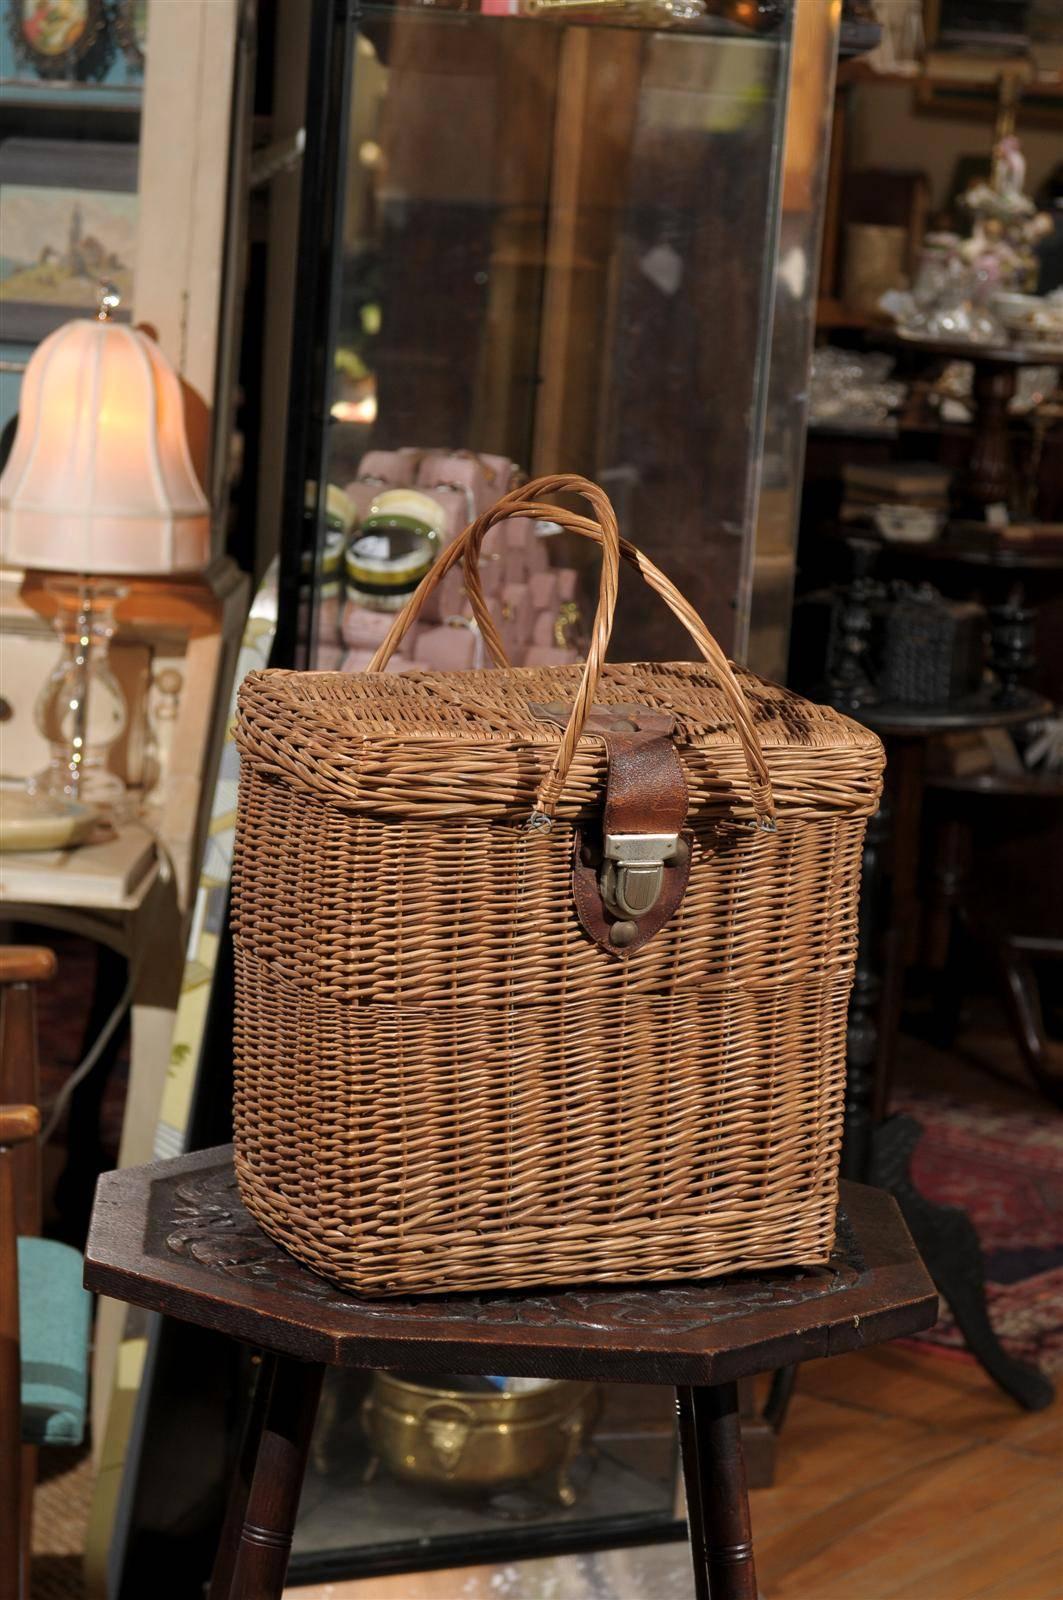 French wicker basket with a leather closure on the lid and a pair of woven handles.